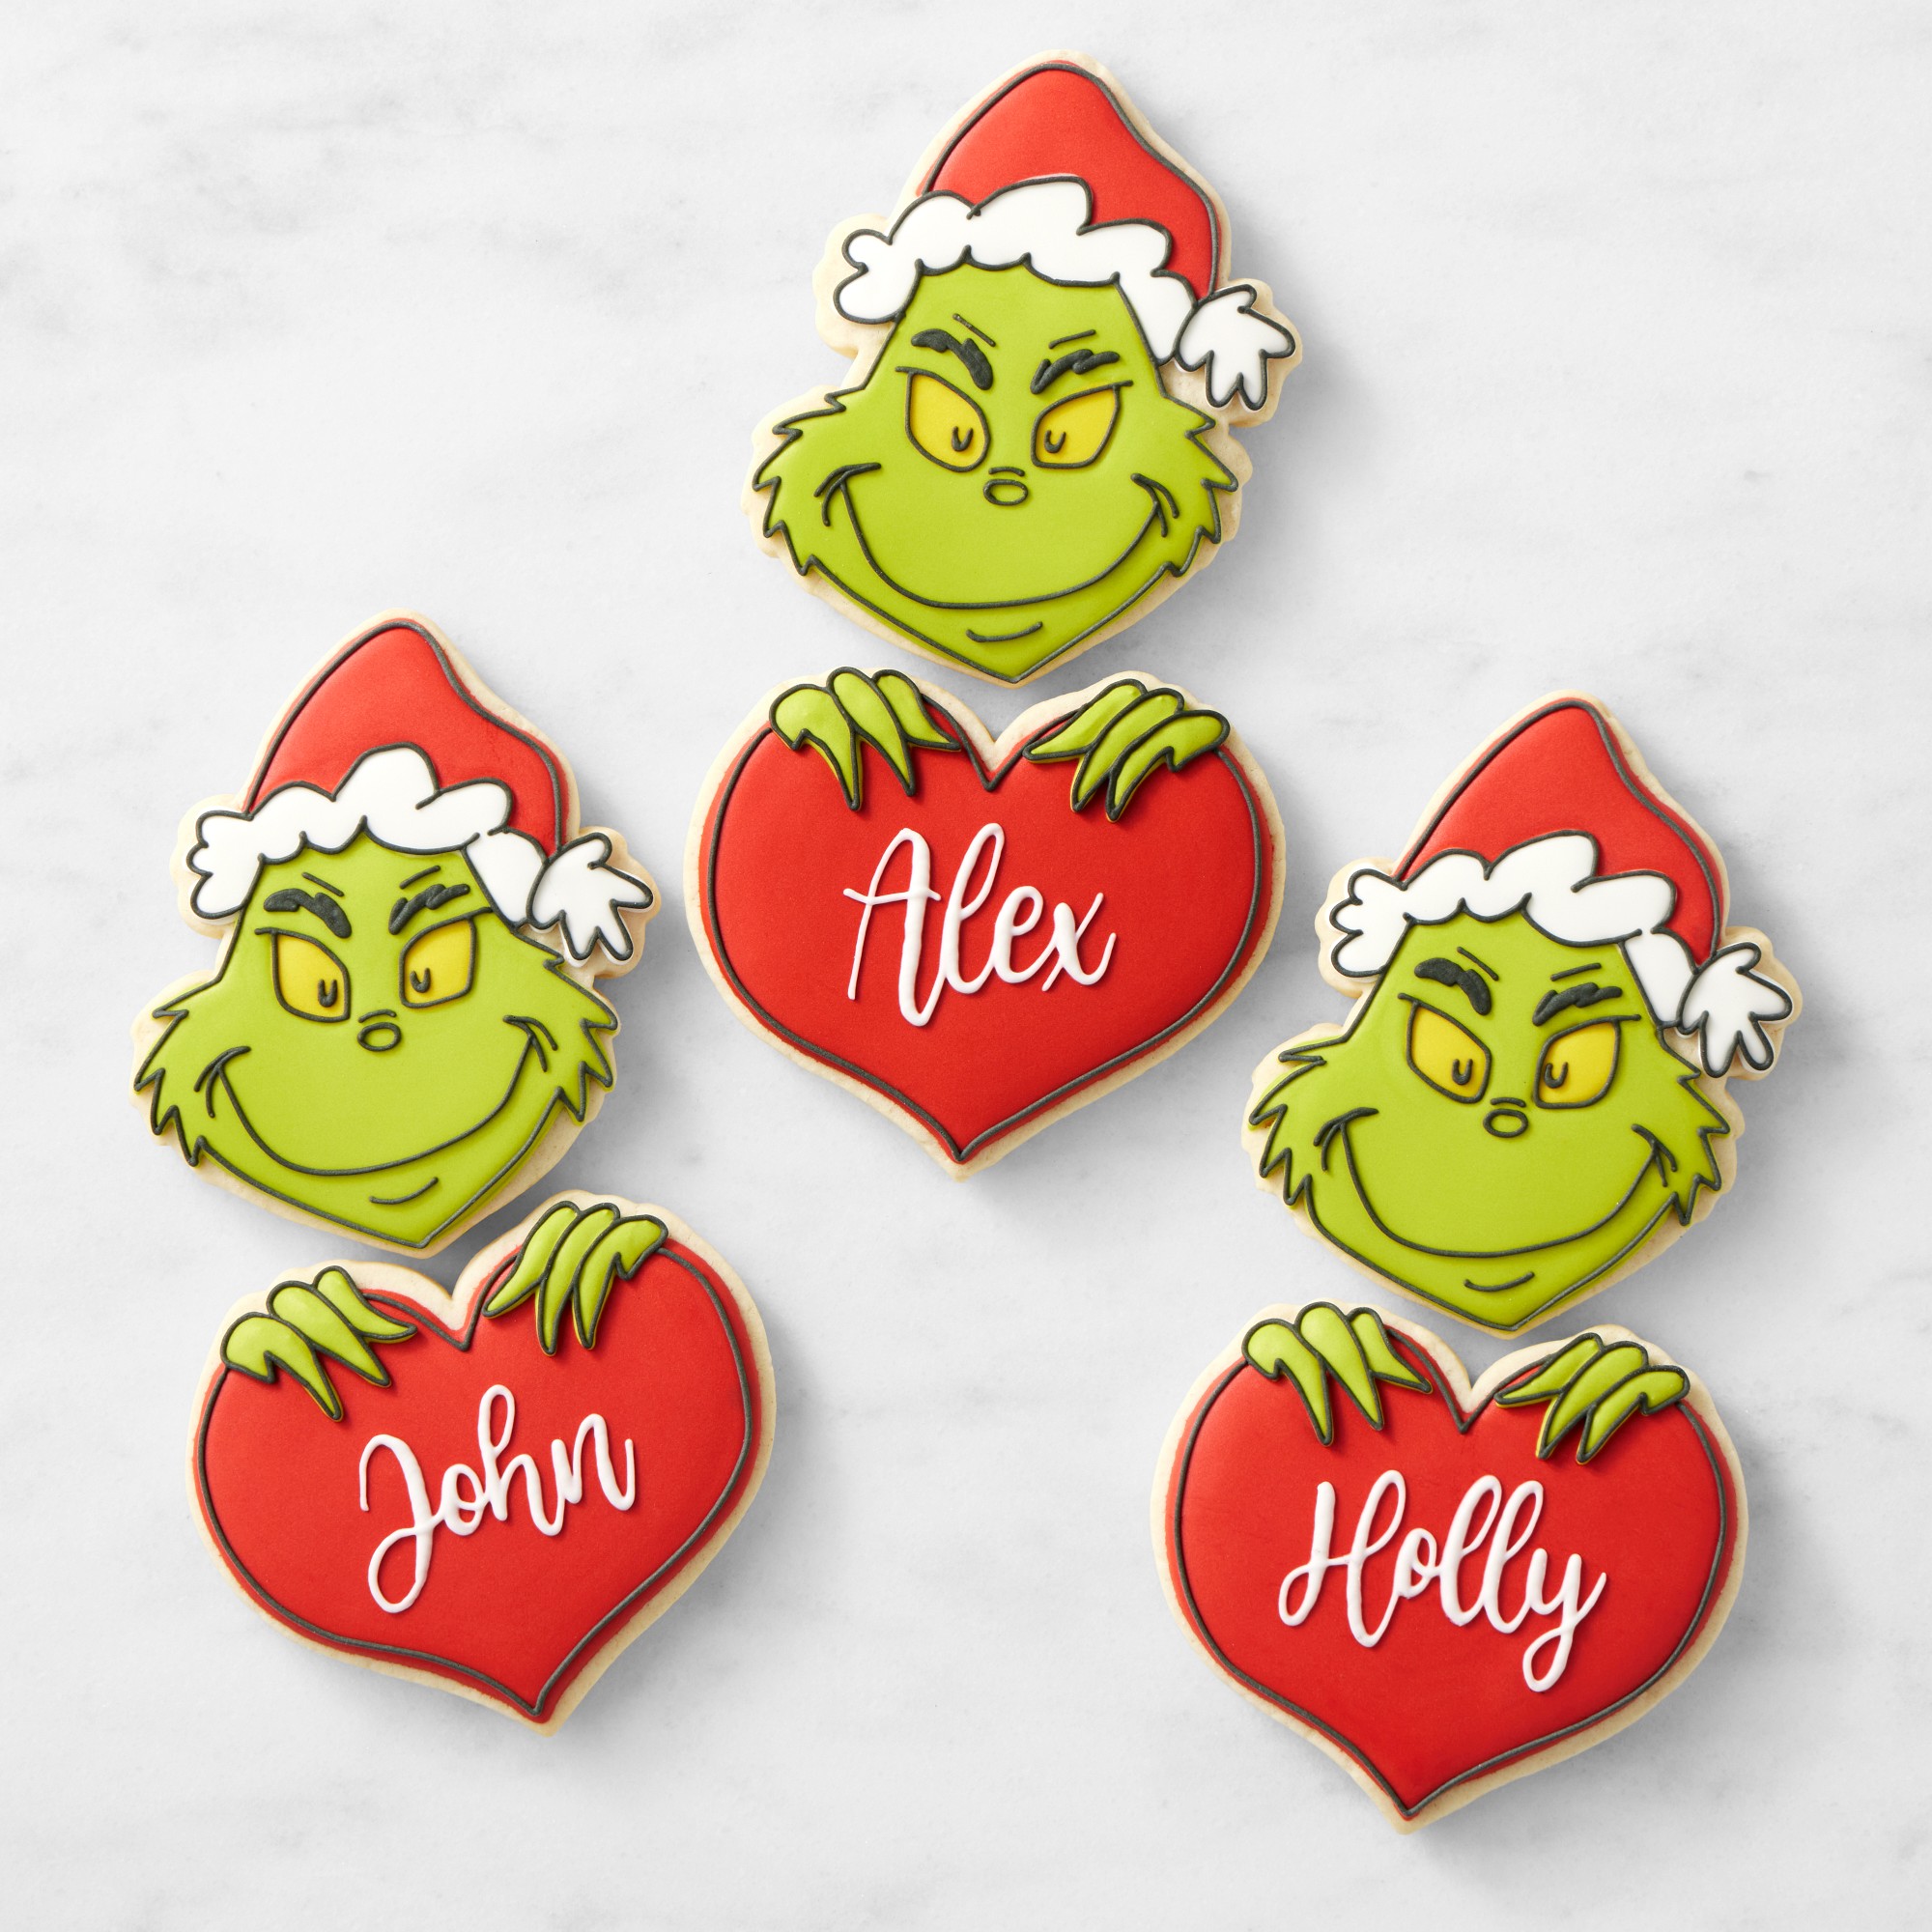 The Grinch™ Cookie Set